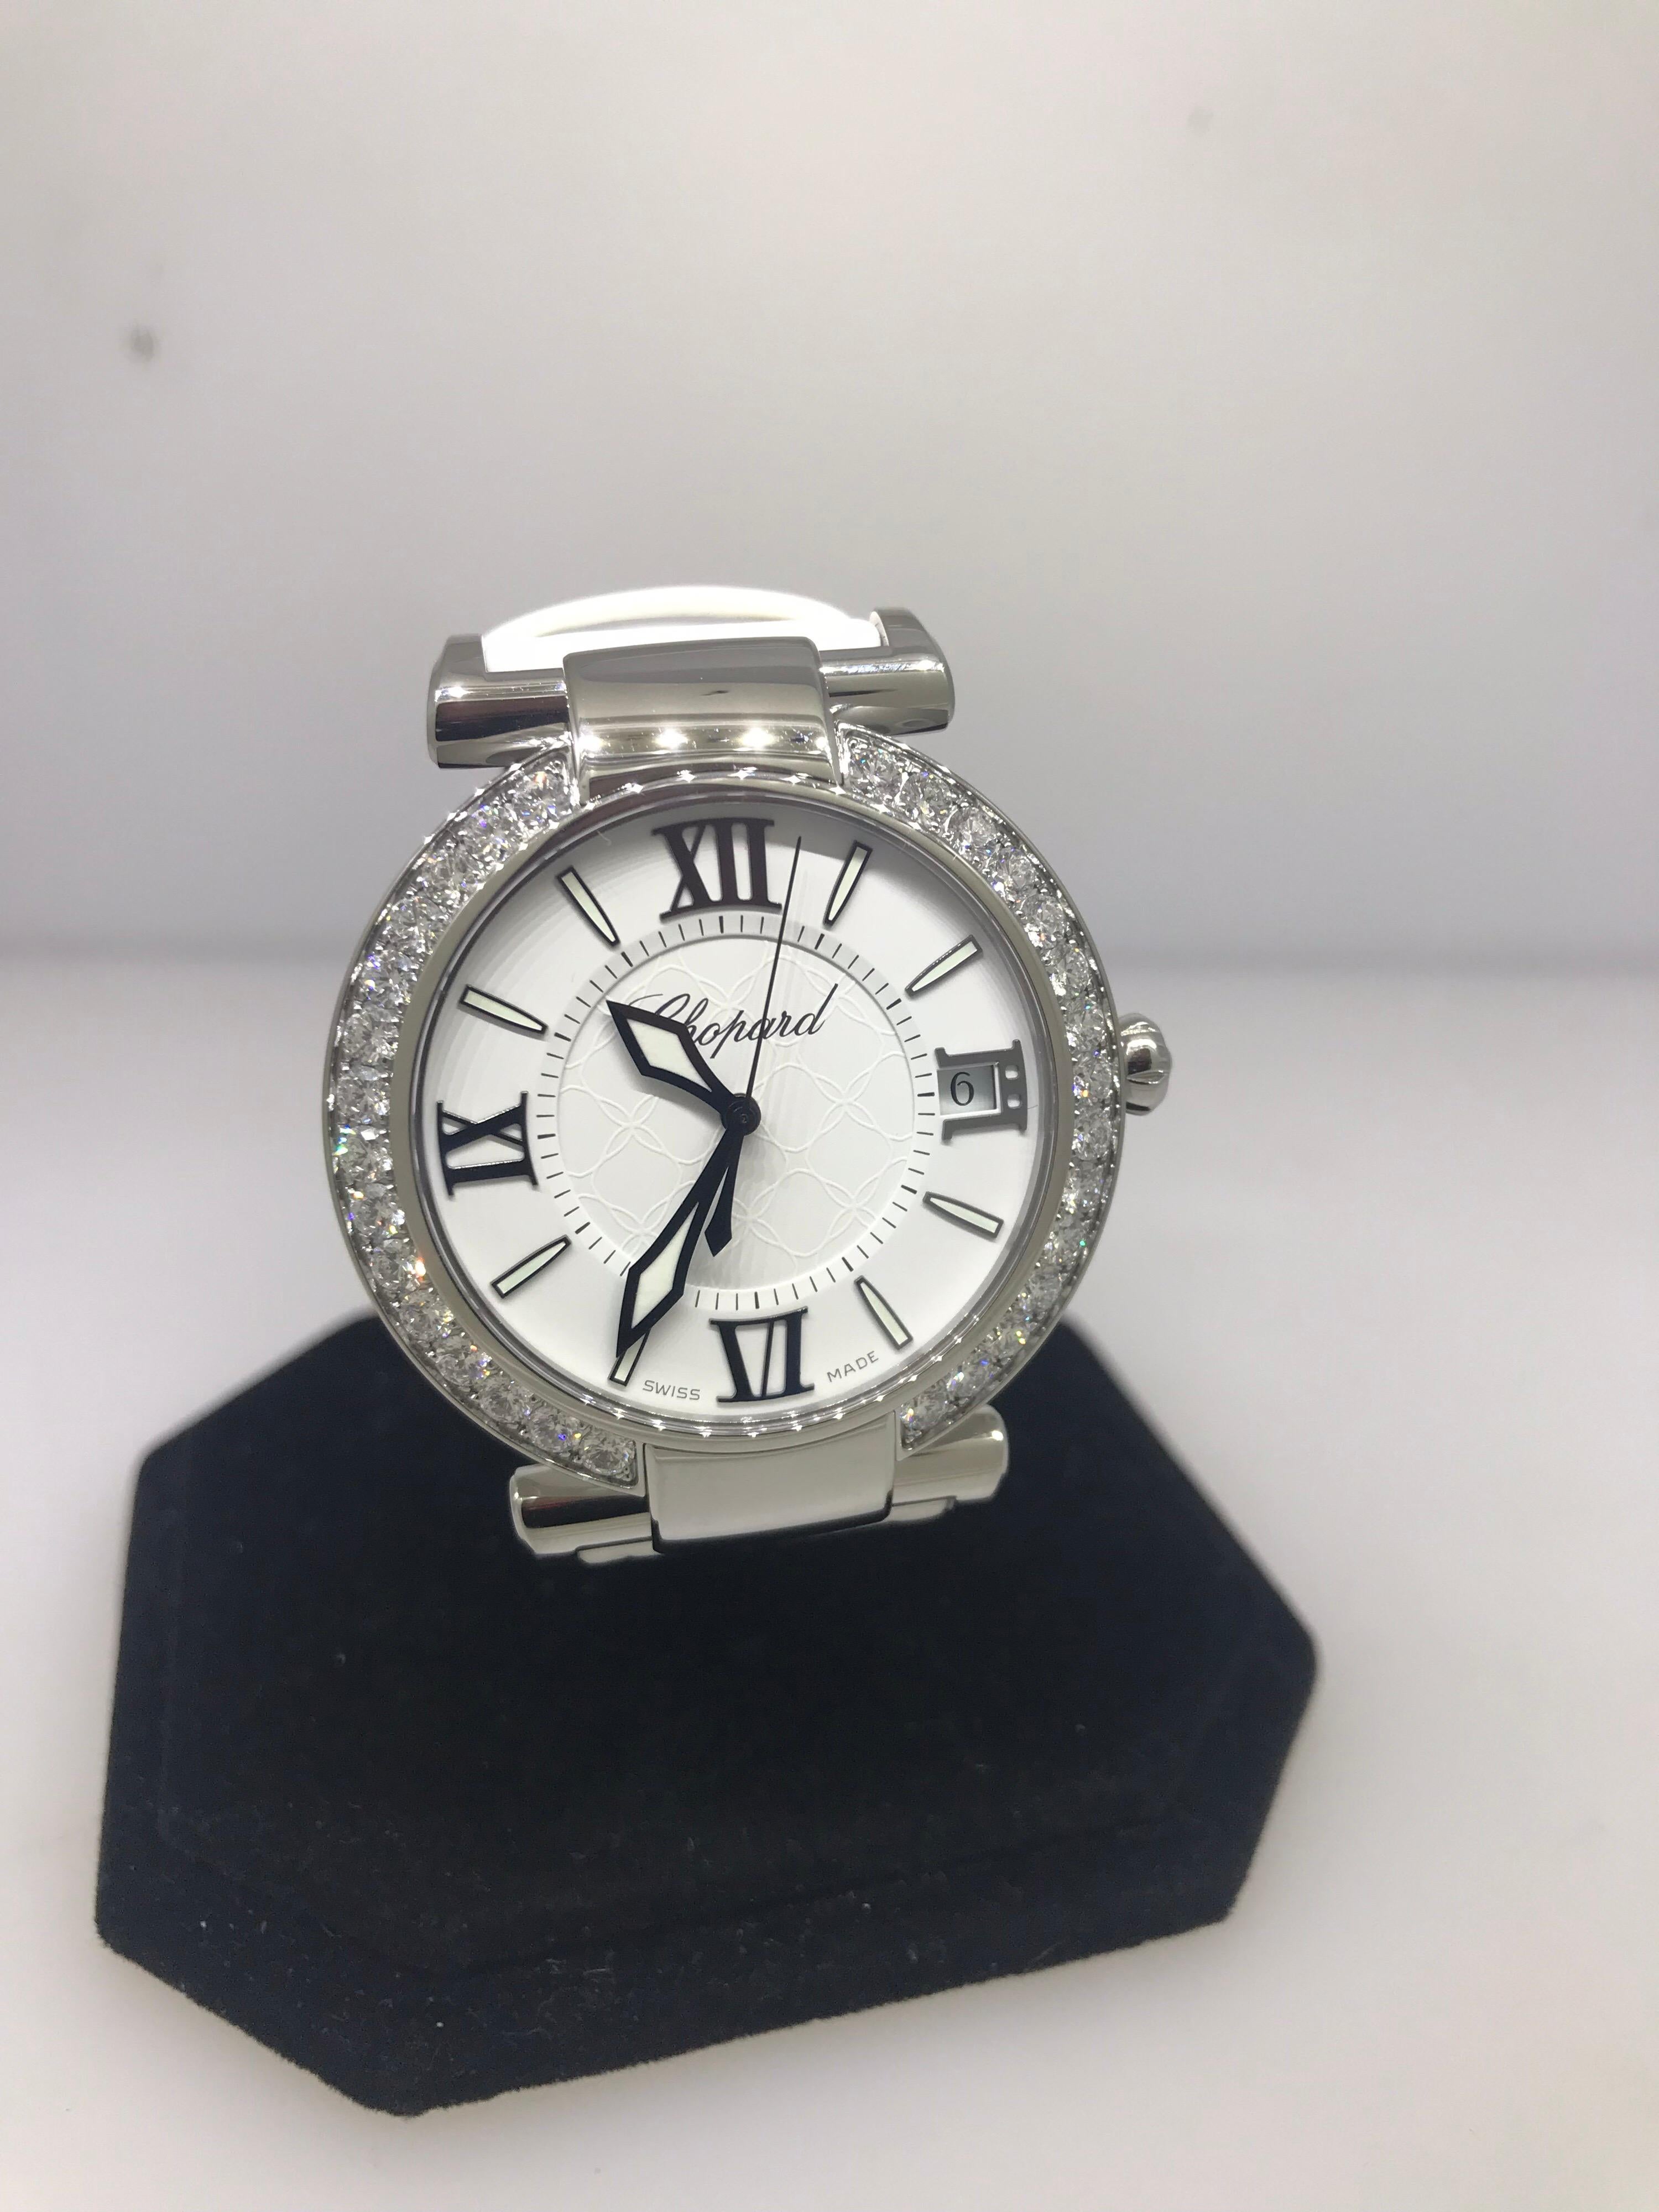 Chopard Imperiale Ladies Watch

Model Number: 38/8531-3008

100% Authentic

Brand New

Comes with original Chopard Box, Certificate of Authenticity & Warranty, and Instruction Manual

Stainless Steel Case & Buckle 

Bezel set with 30 Diamonds (2.41